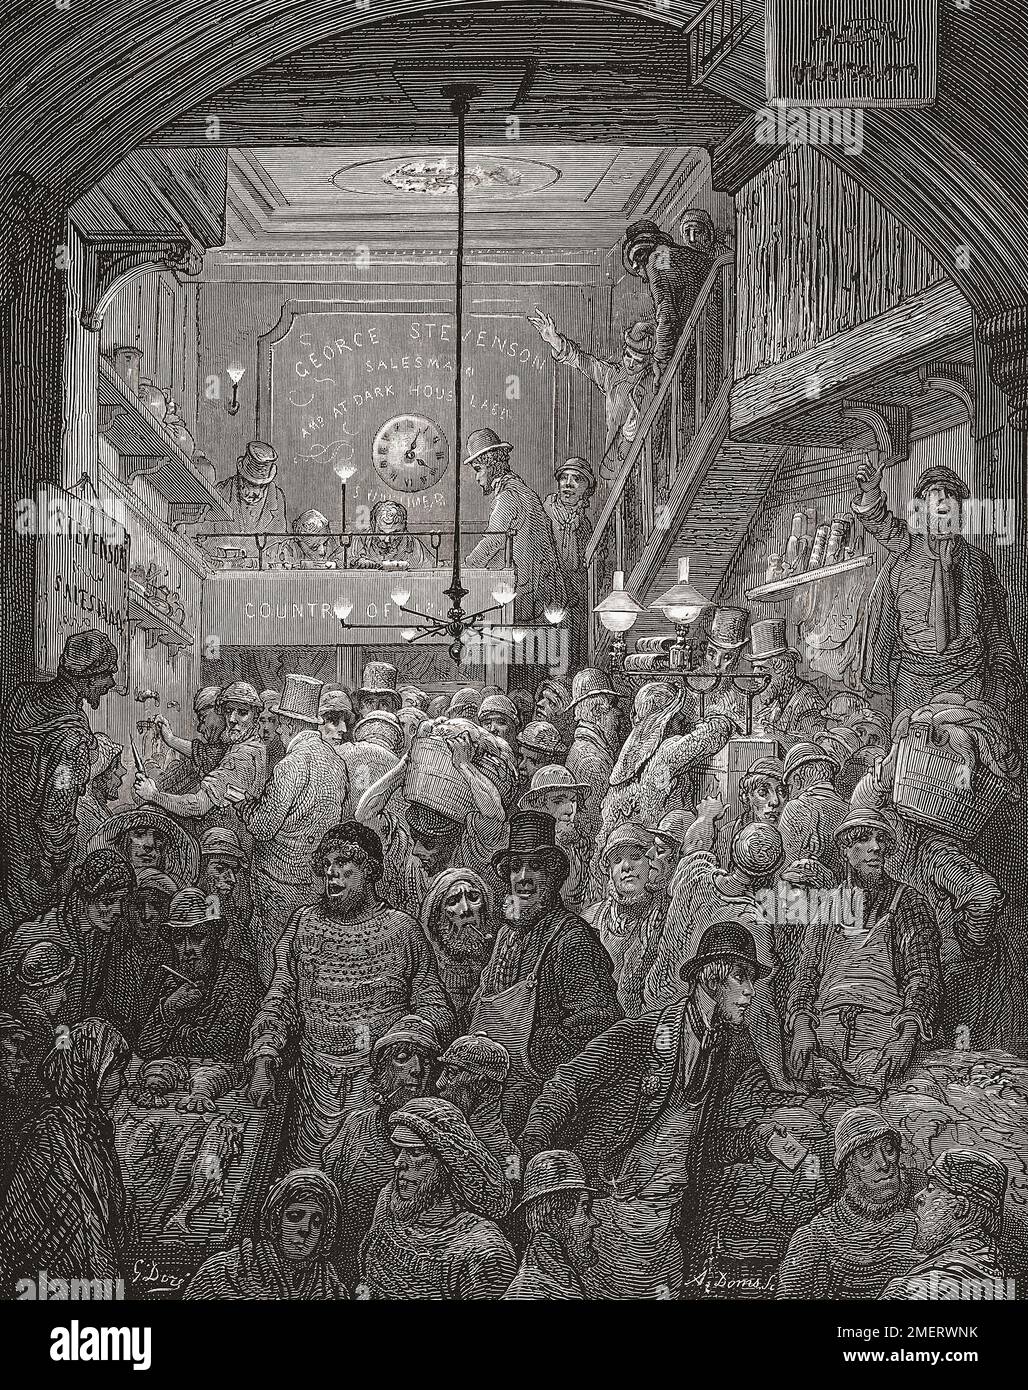 Early morning in Billingsgate fish market, 19th century London.  After an illustration by Gustave Doré in the 1890 American edition of London: A Pilgrimage written by Blanchard Jerrold and illustrated by Gustave Doré. Stock Photo